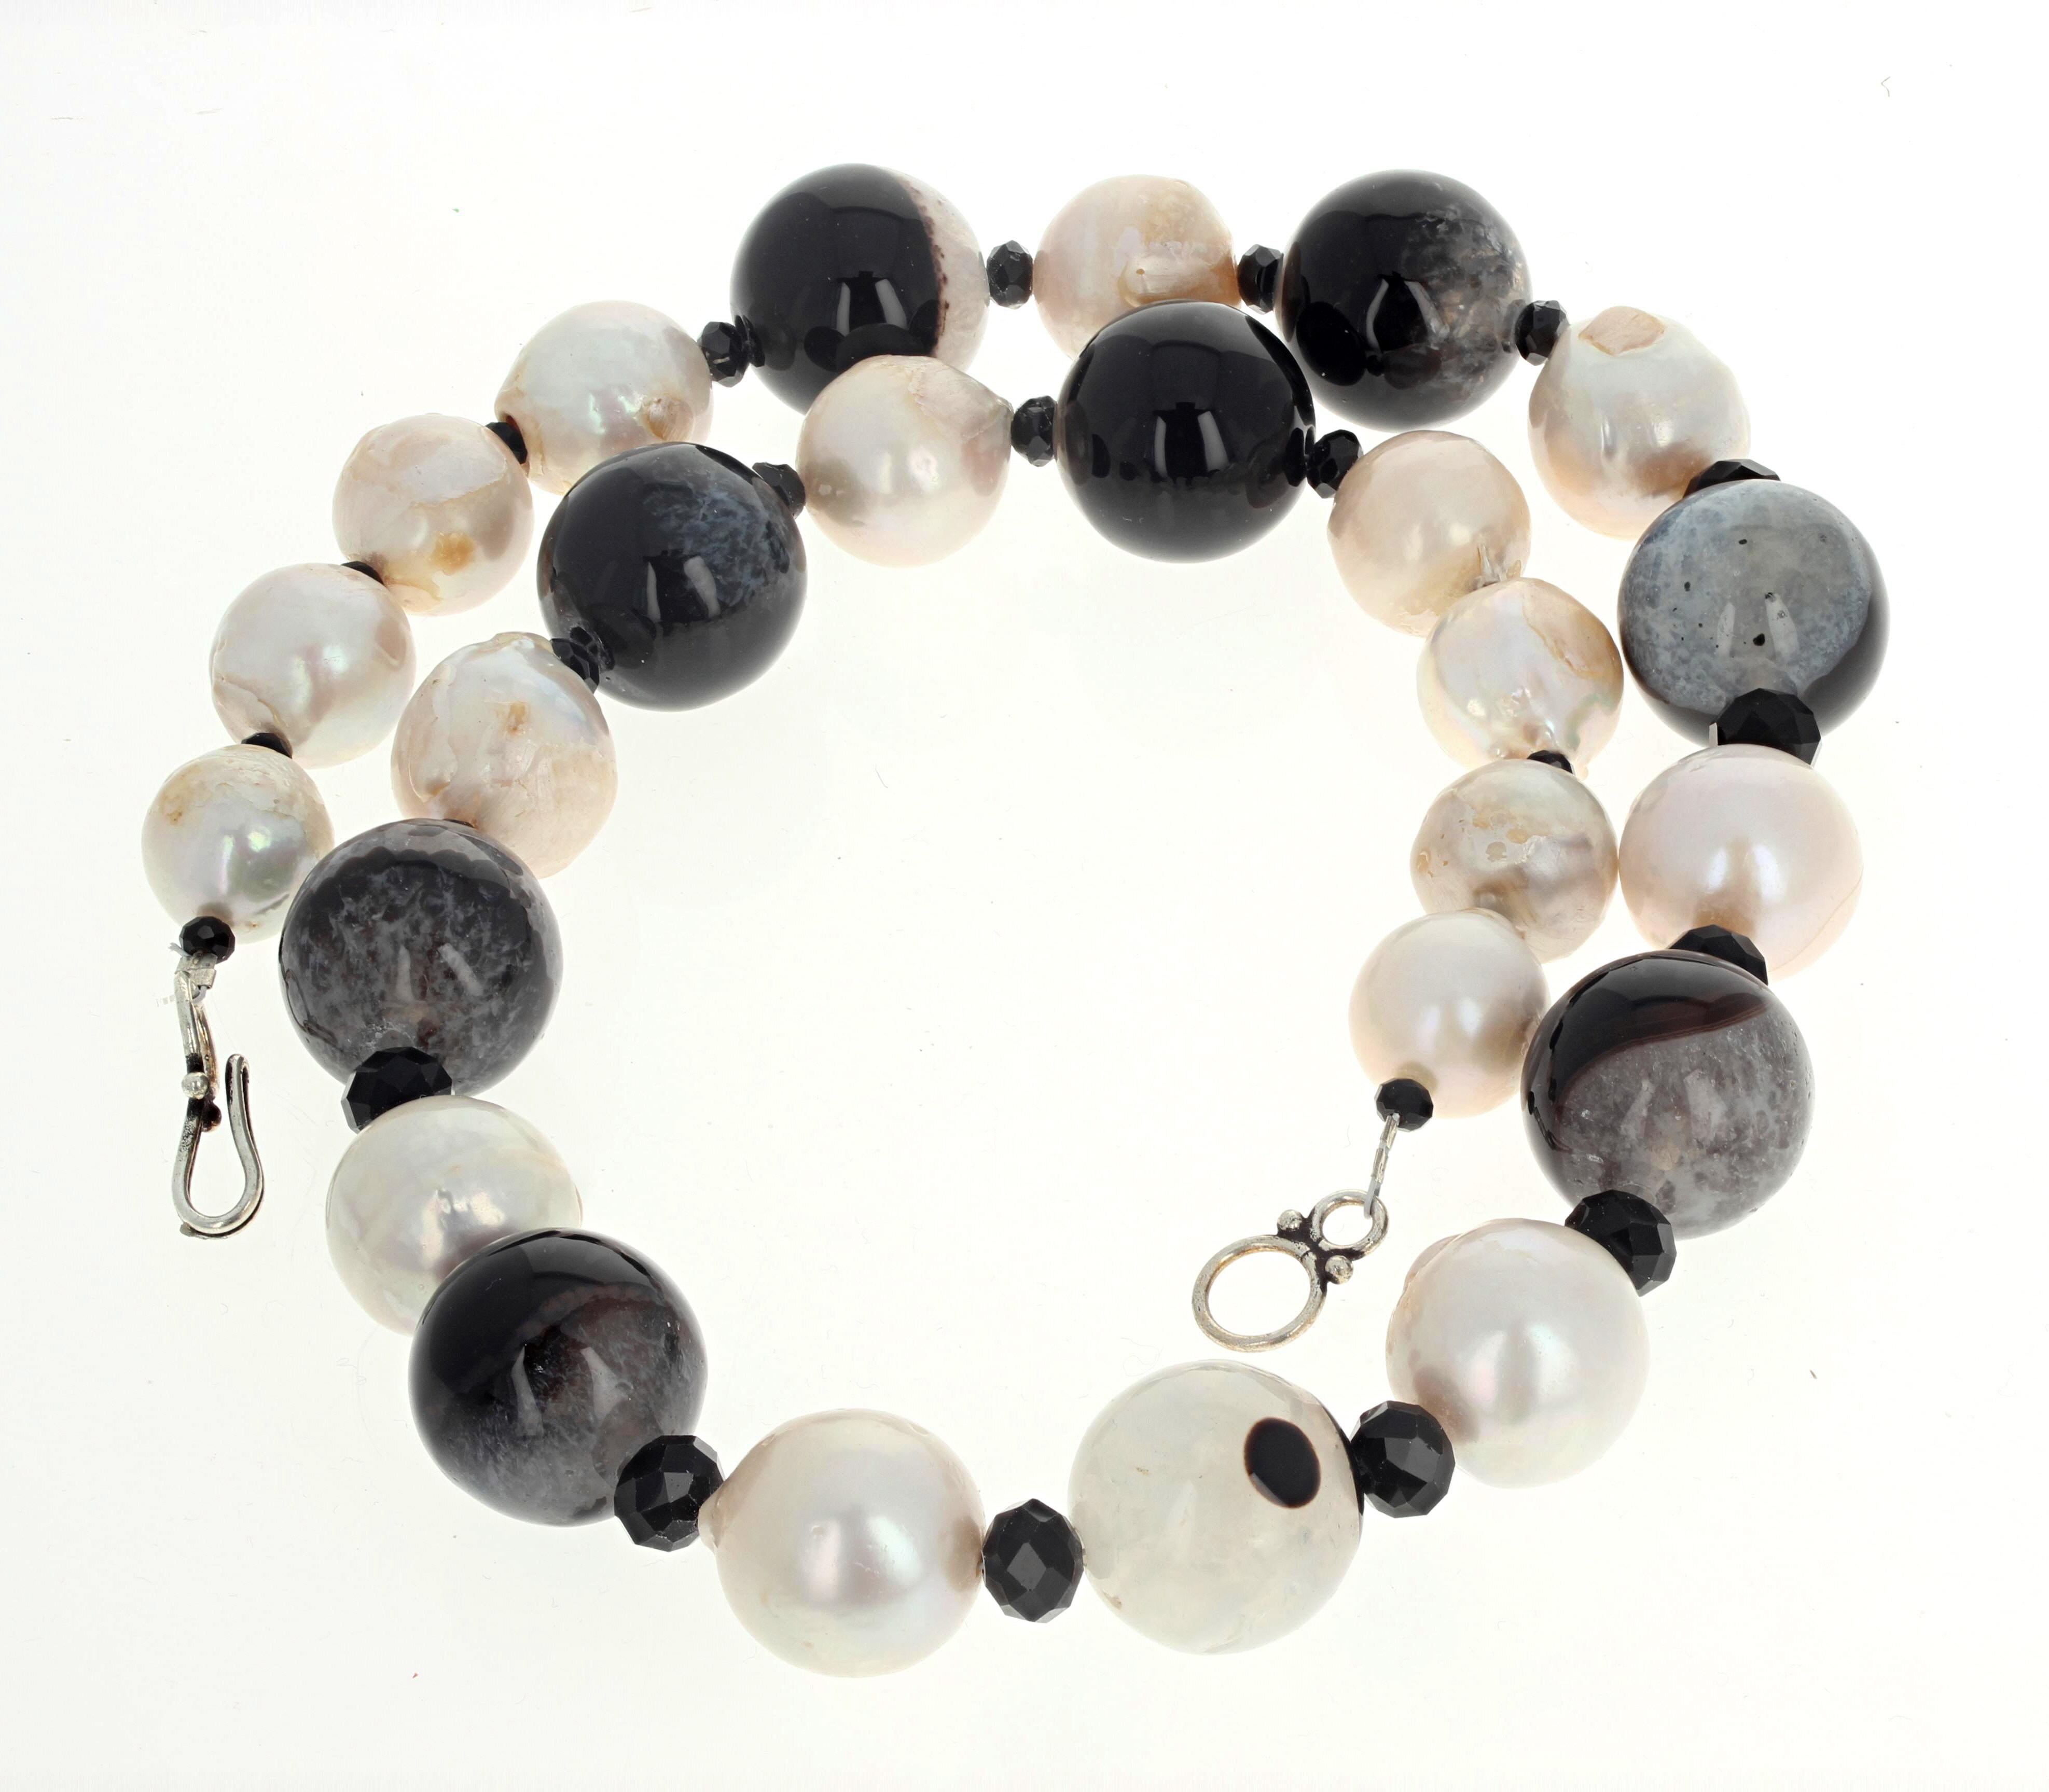 These highly polished blackandwhite natural Agates (approximately 20mm) are enhanced by these natural fresh water white Pearls and highly polished gem cut glistening natural black Onyx.   The largest Pearls are approximately 18mm.   This 23 inch